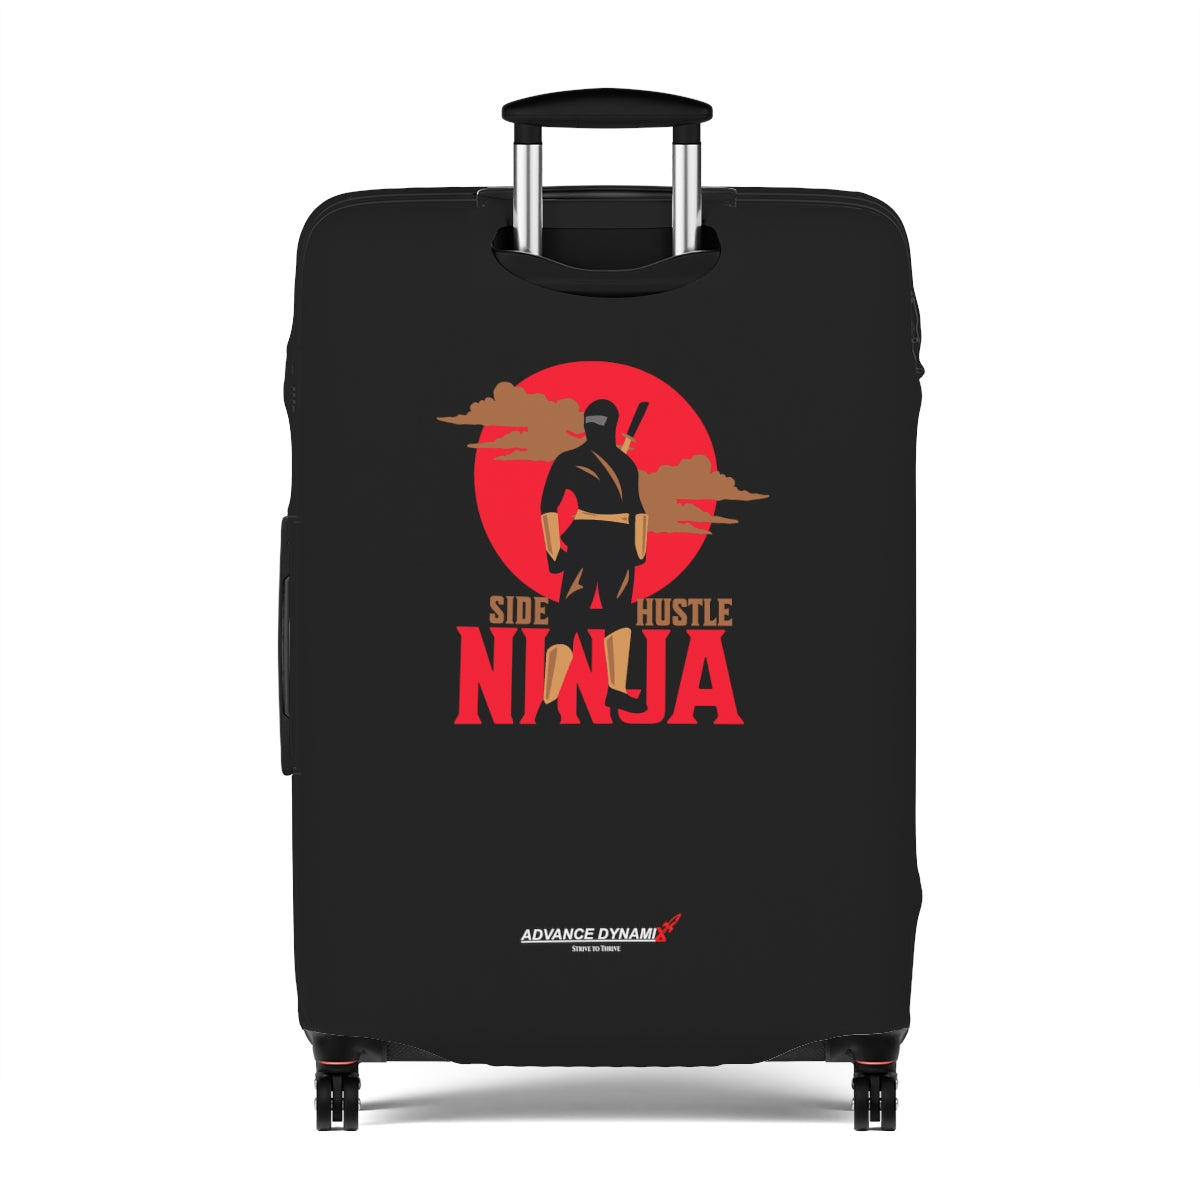 Side Hustle Ninja - Luggage Covers Infused with Advance Dynamix Add-A-Tude - Tell the world!